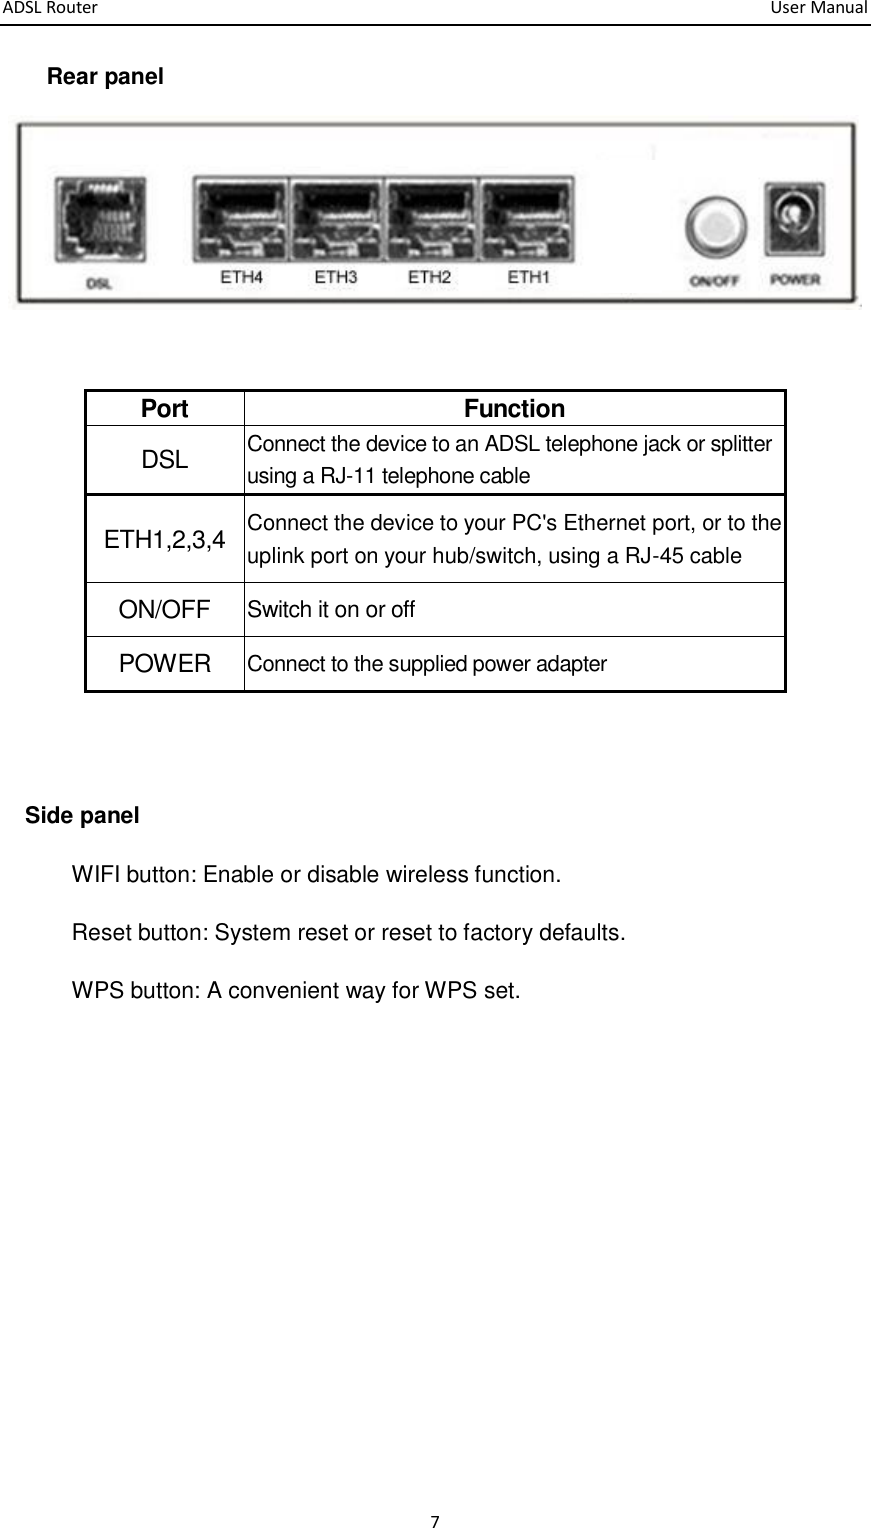 ADSL Router       User Manual 7 Rear panel          Side panel WIFI button: Enable or disable wireless function. Reset button: System reset or reset to factory defaults. WPS button: A convenient way for WPS set.       Port Function DSL Connect the device to an ADSL telephone jack or splitter using a RJ-11 telephone cable ETH1,2,3,4 Connect the device to your PC&apos;s Ethernet port, or to the uplink port on your hub/switch, using a RJ-45 cable ON/OFF Switch it on or off POWER Connect to the supplied power adapter 